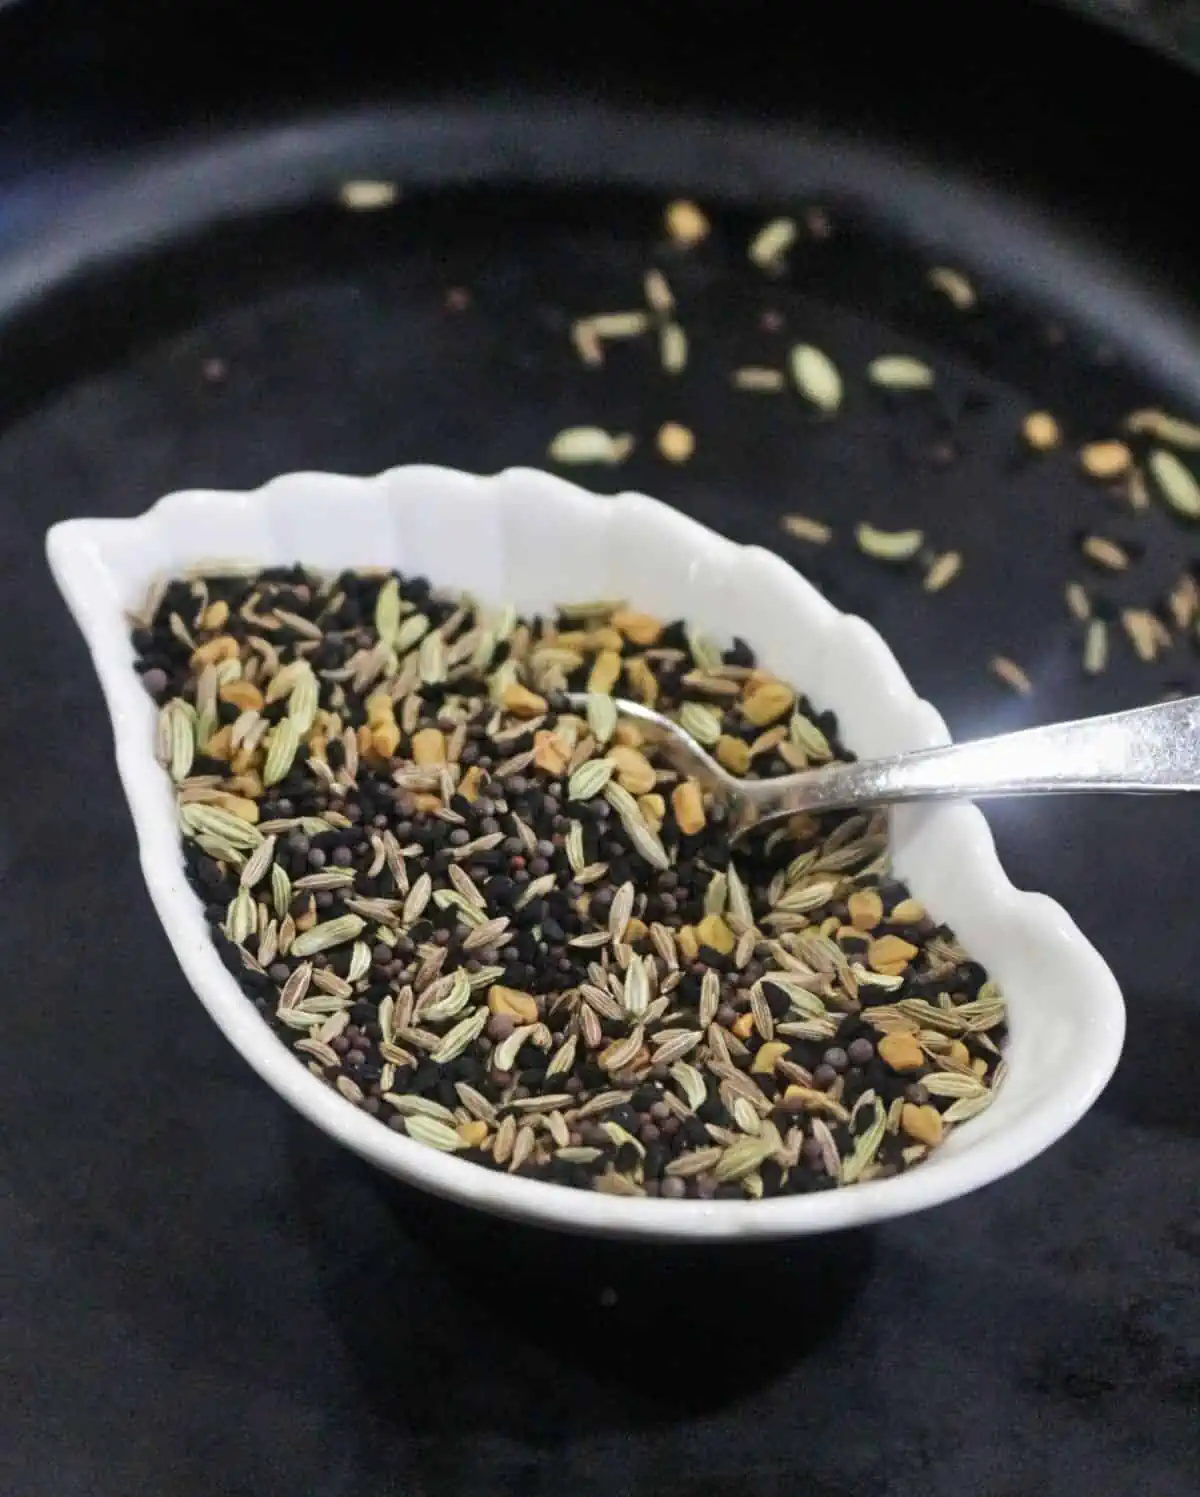 Panch phoran spice blend in a white bowl.